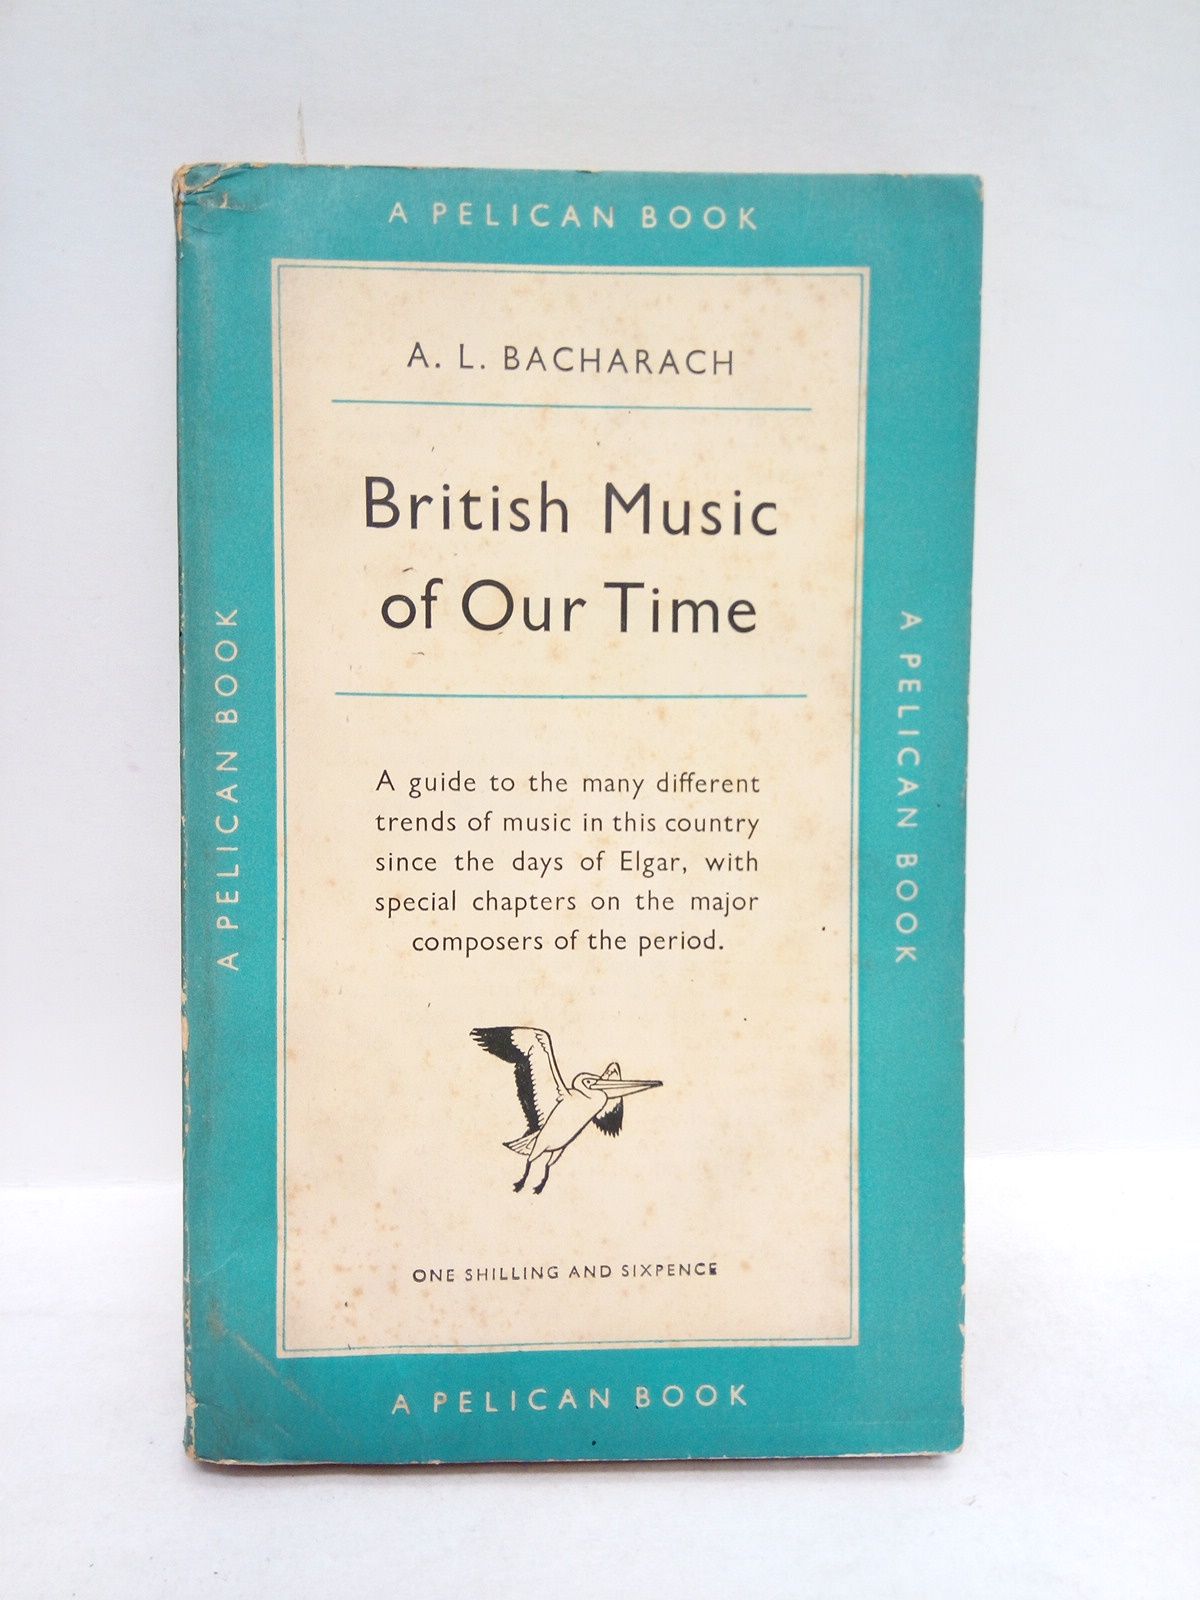 VARIOS (editor, A. L. Bacharach) - British Music of Our Time: A guide to the many different trends of music in this country since the days of Elgar, with special chapters on the major composers of the period /  Edited by A. L. Bacharach